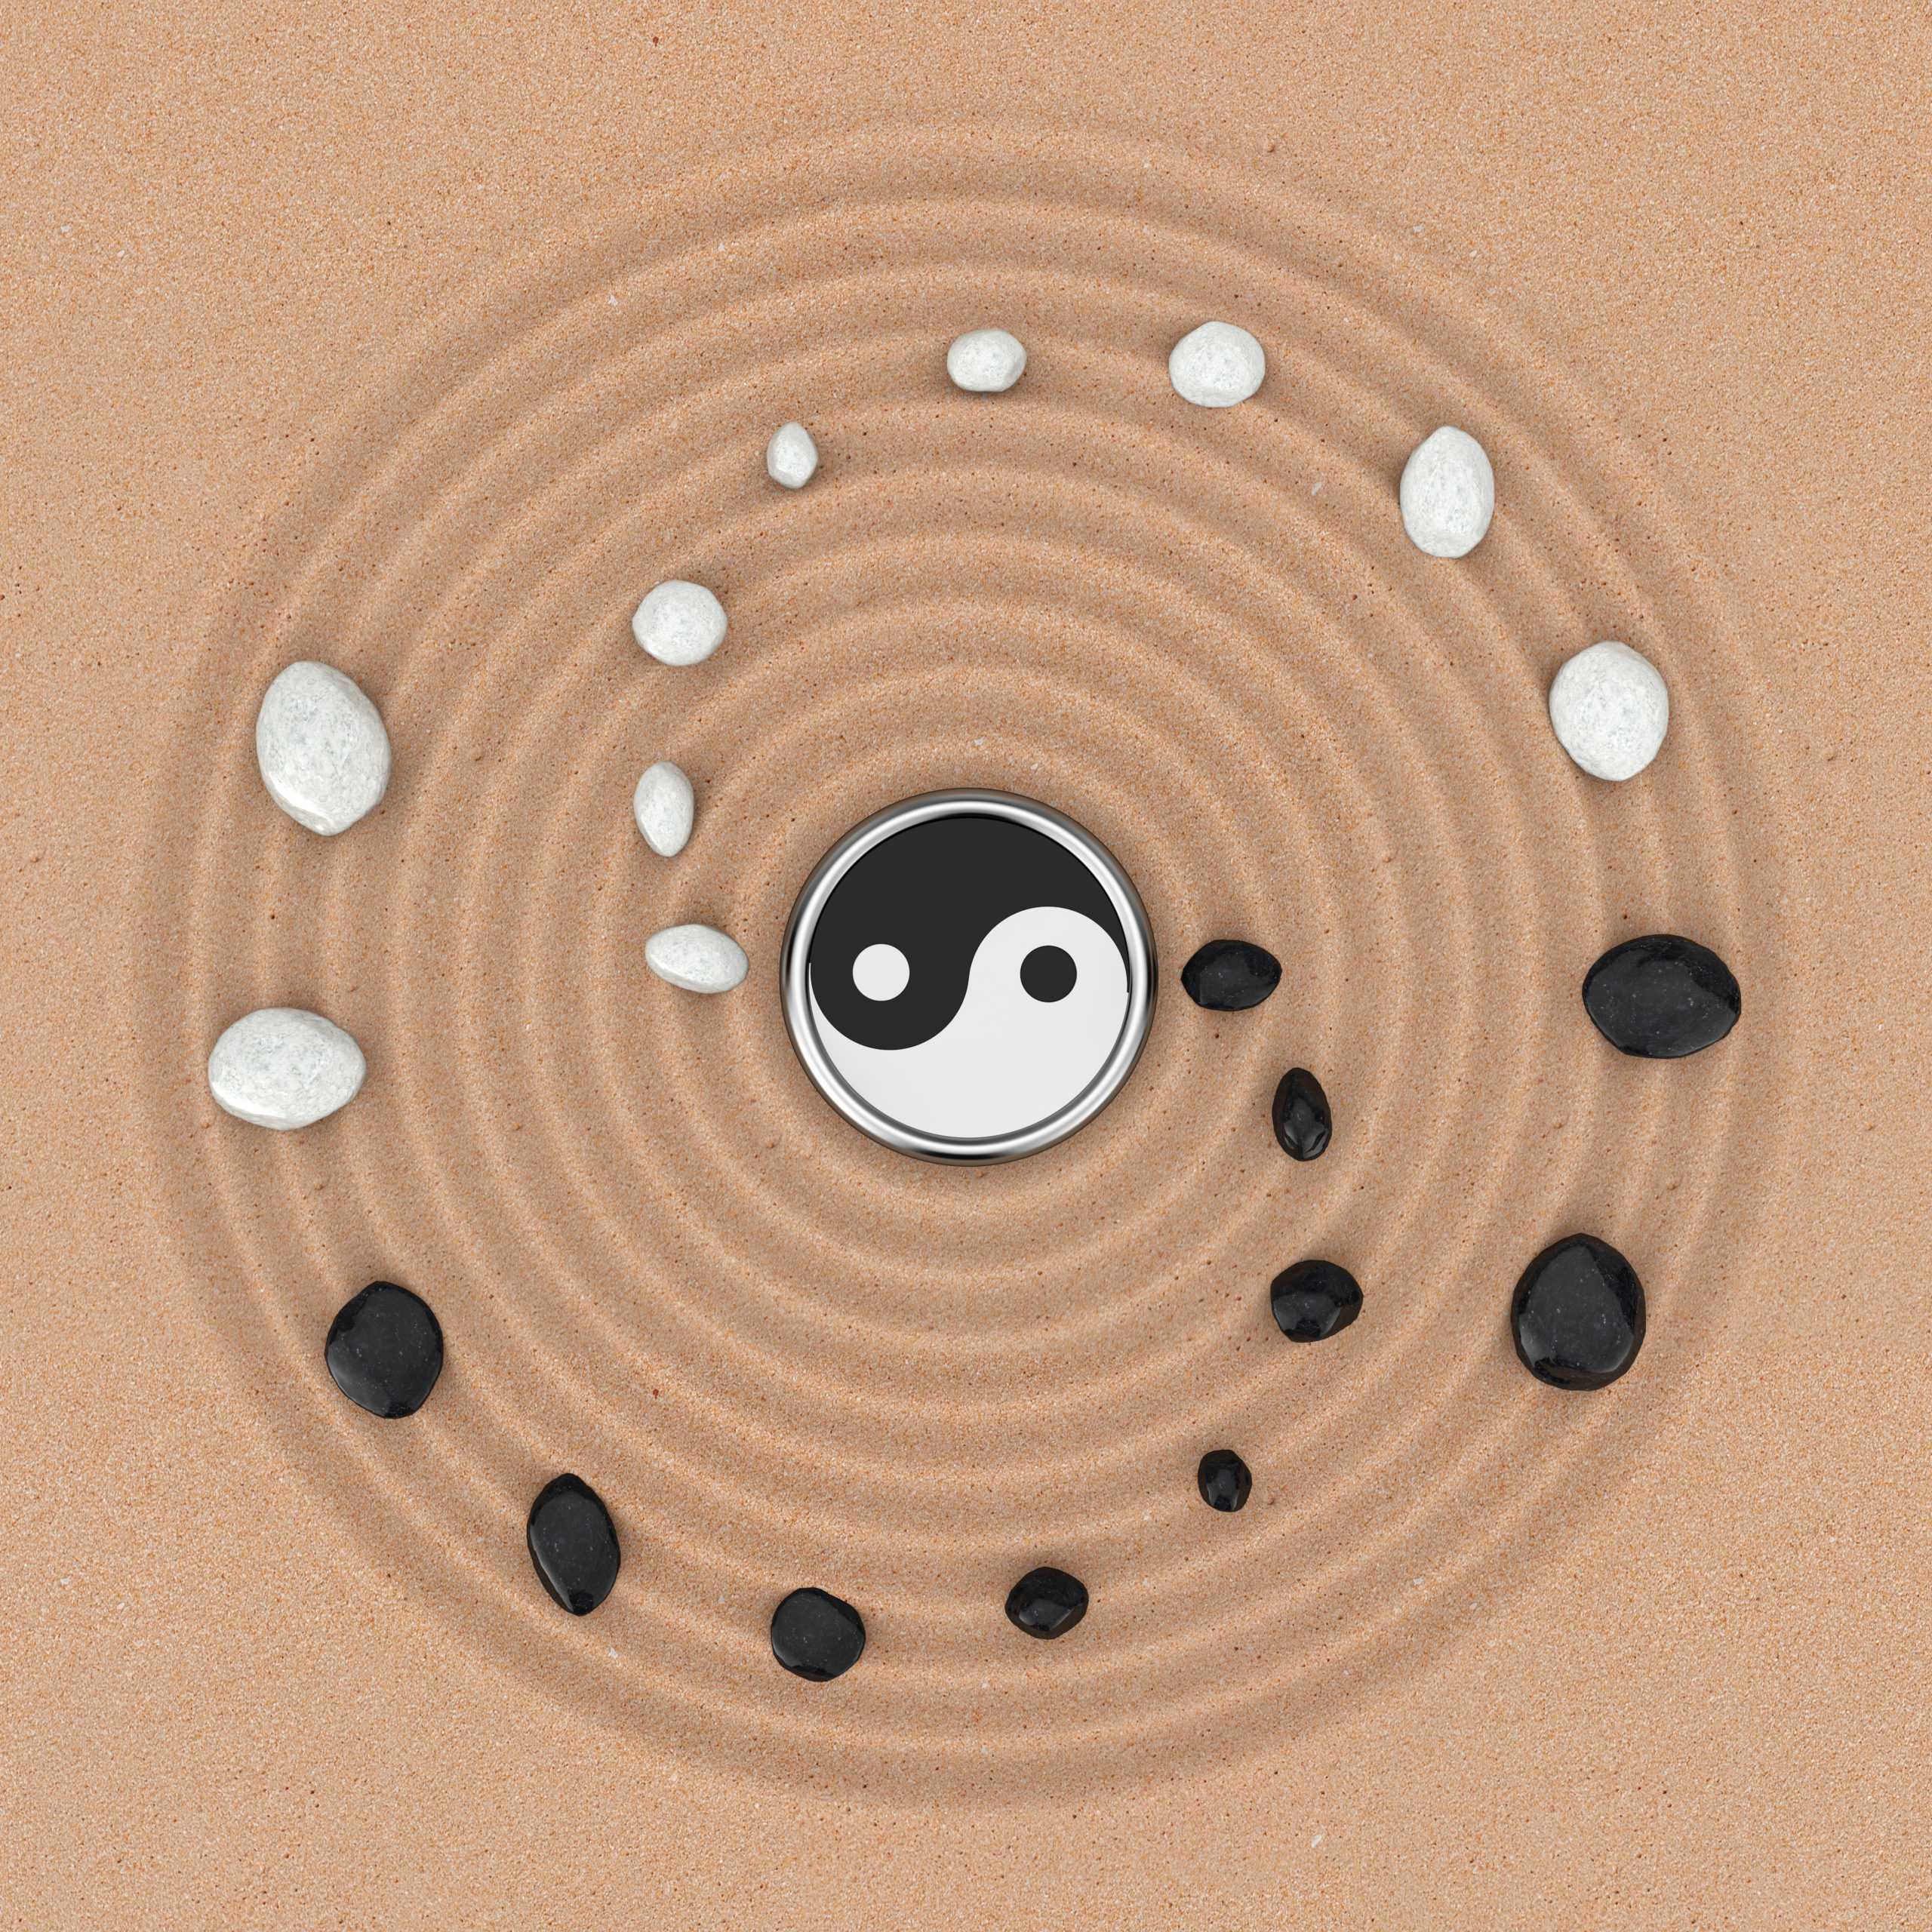 ying-yang-sign-with-white-and-black-stones-over-zen-meditation-sand-garden-extreme-closeup-3d-rendering-scaled